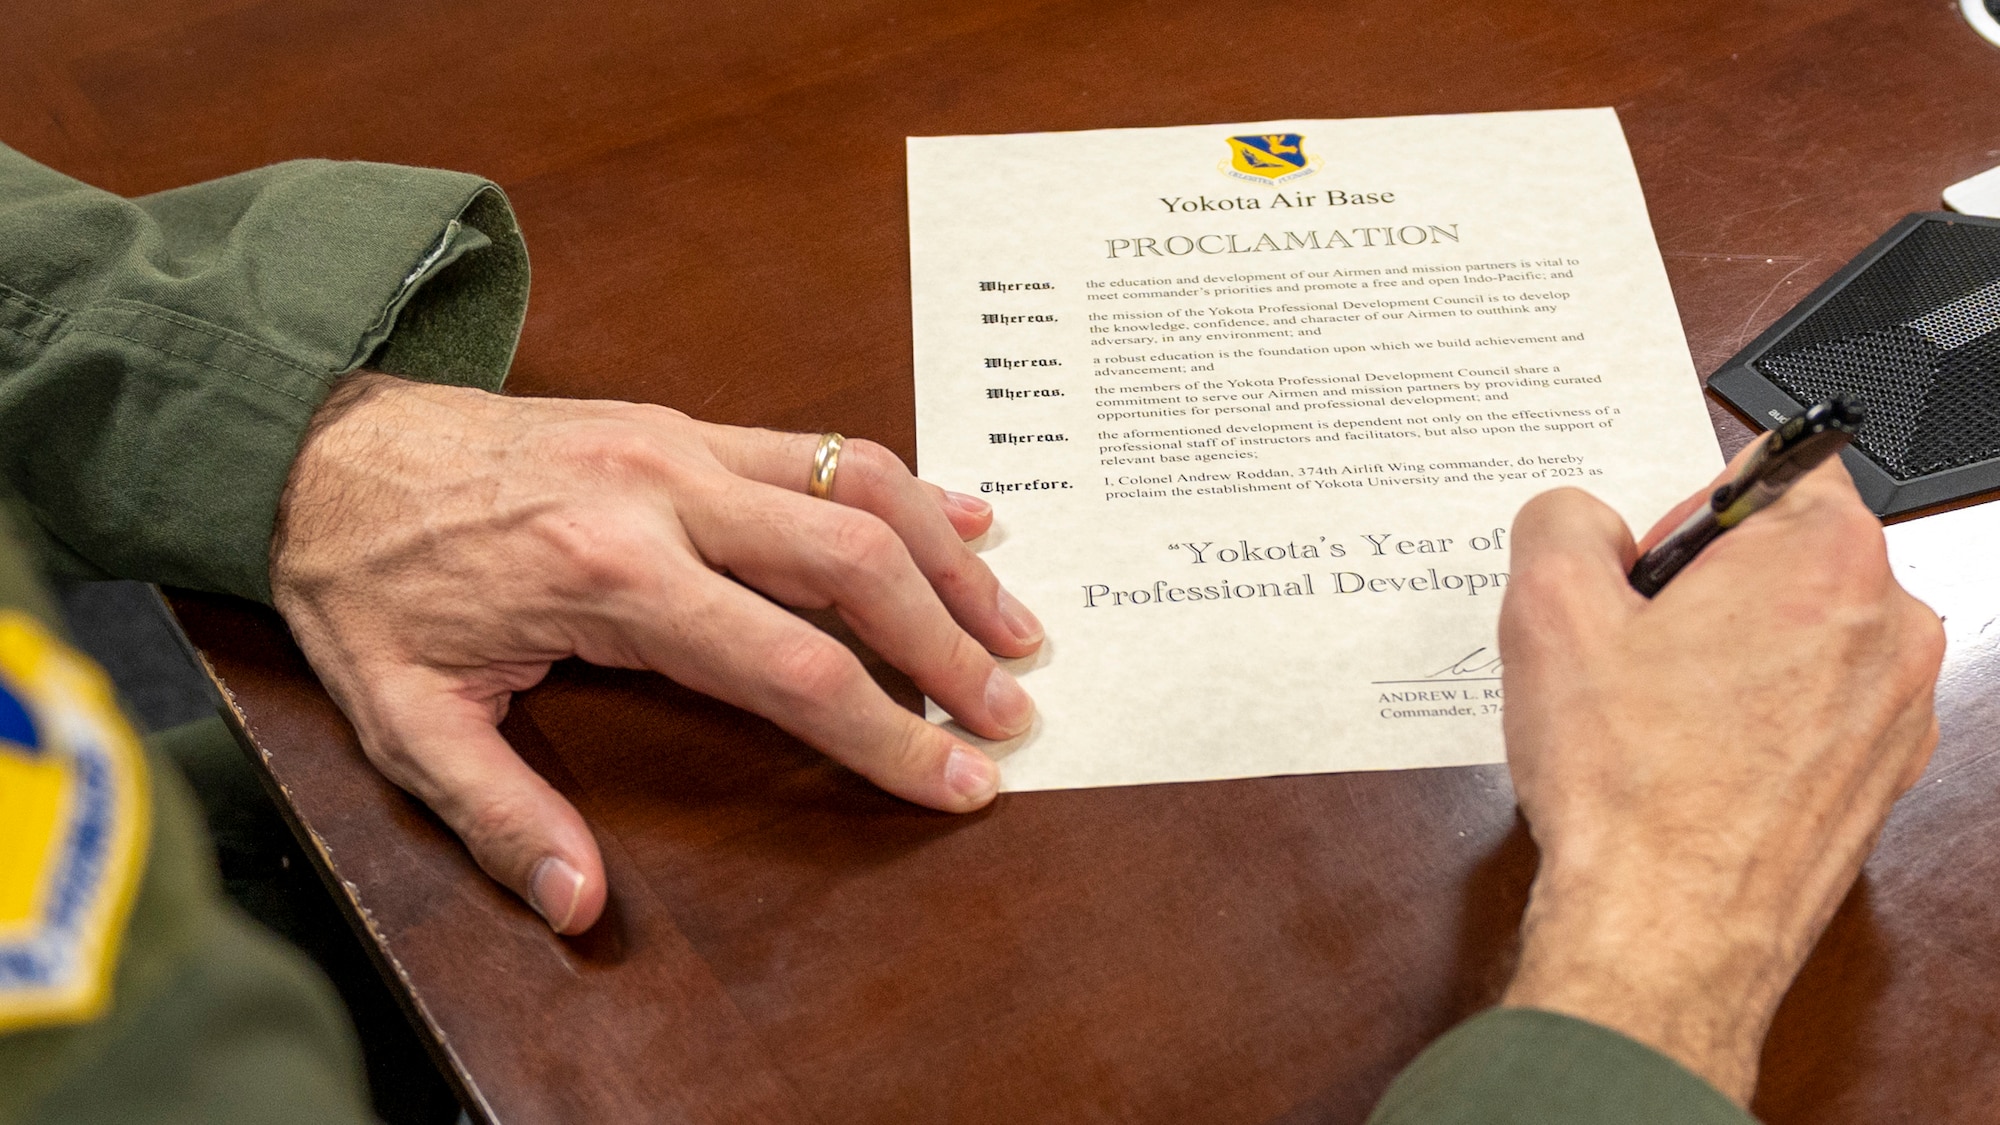 A close up of a hand signing the proclamation